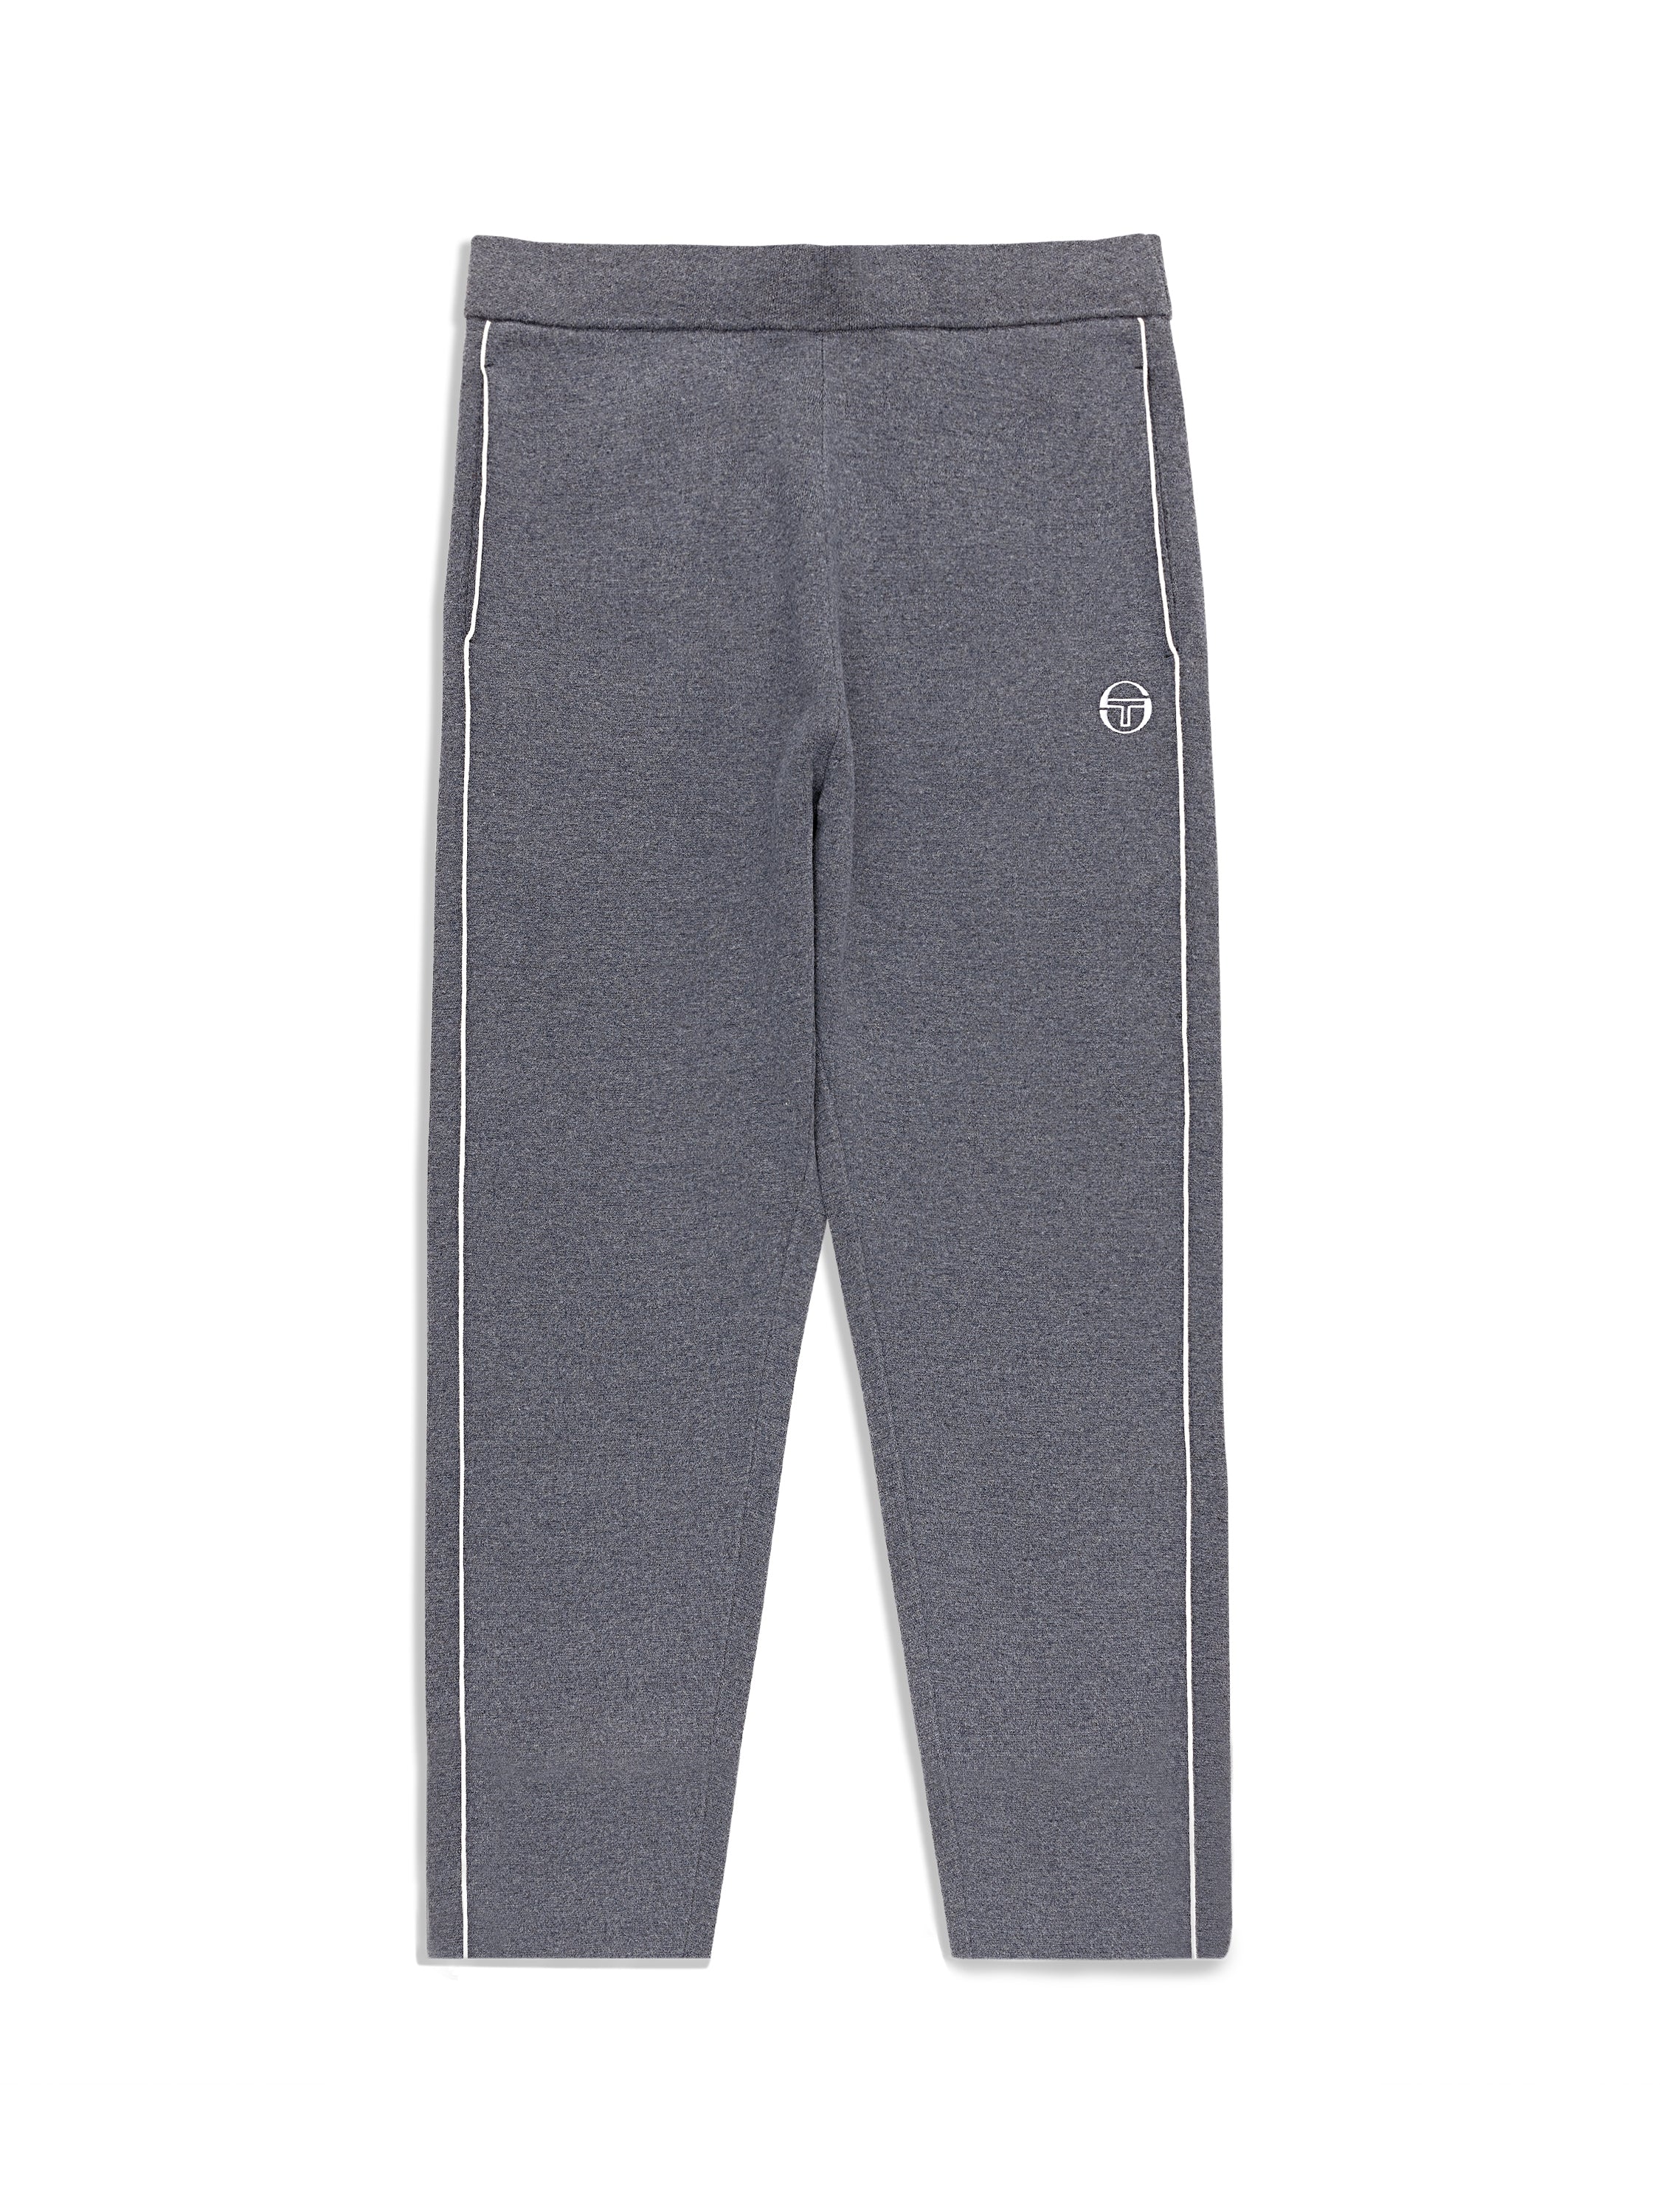 Sporty & Rich Athletic Group Flag Sweatpants Heather Grey